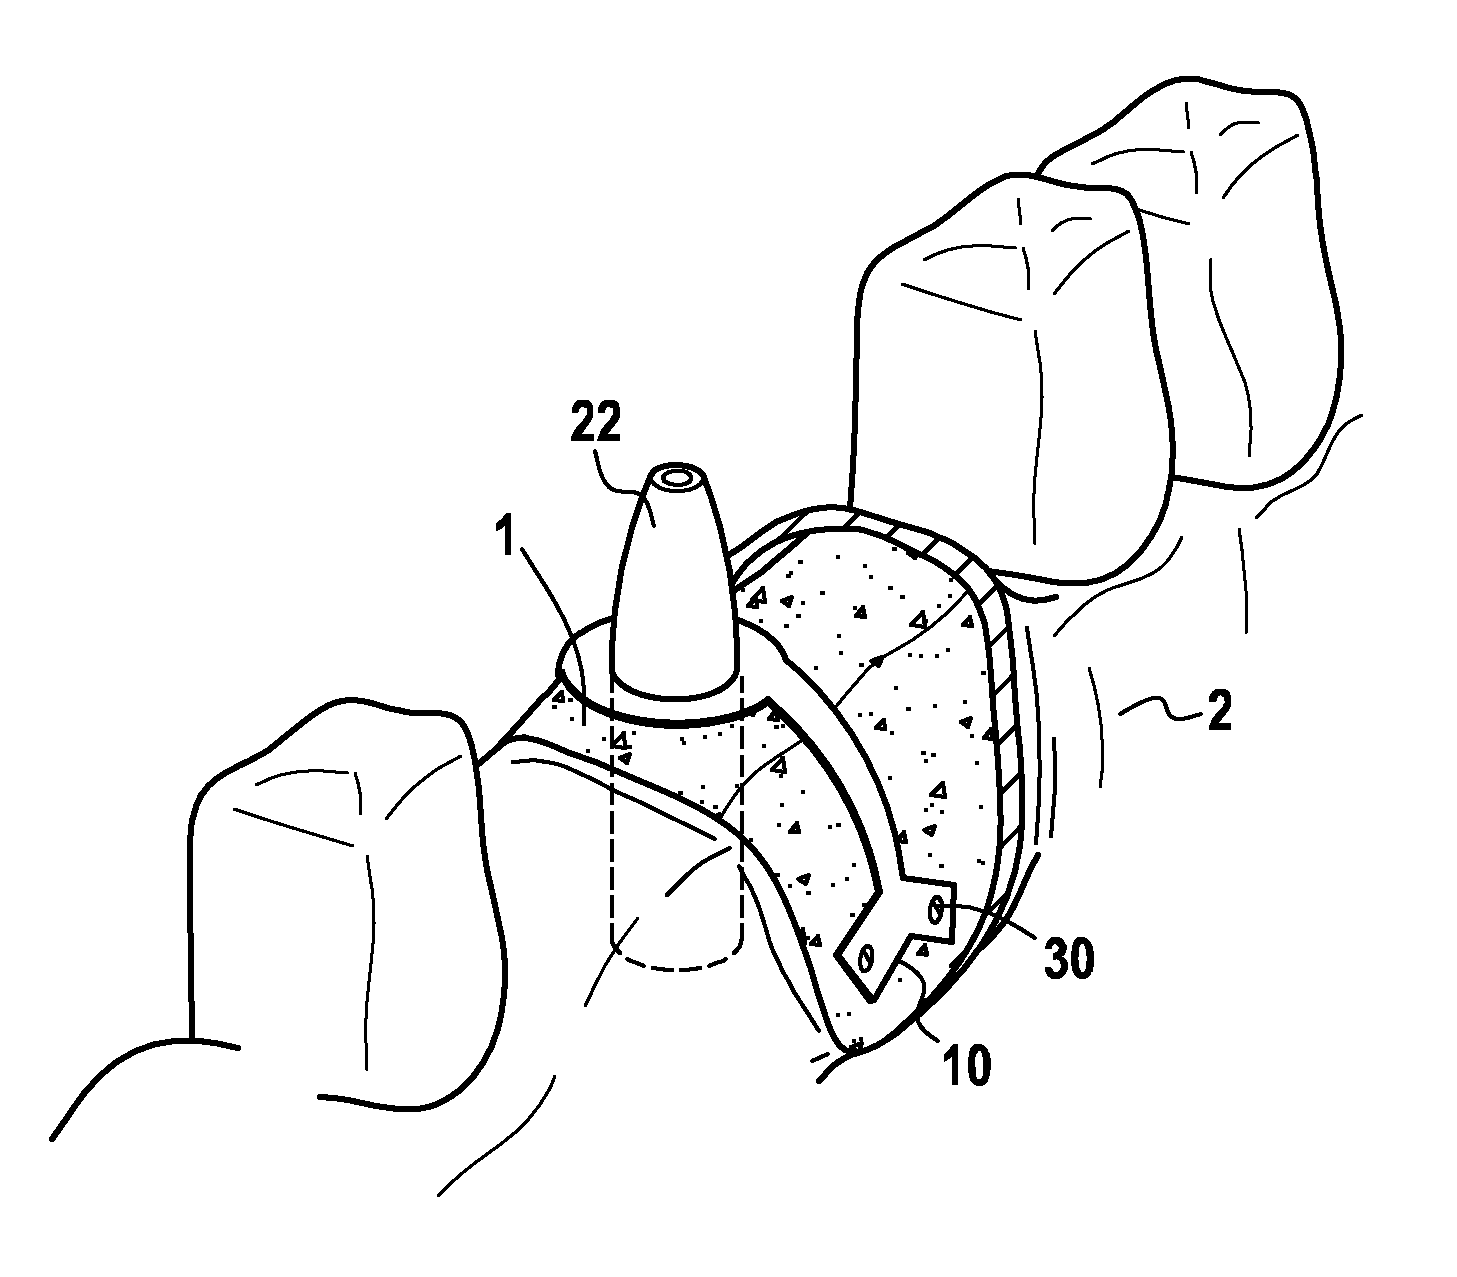 Additional stabilization device for endo-osseous dental implant